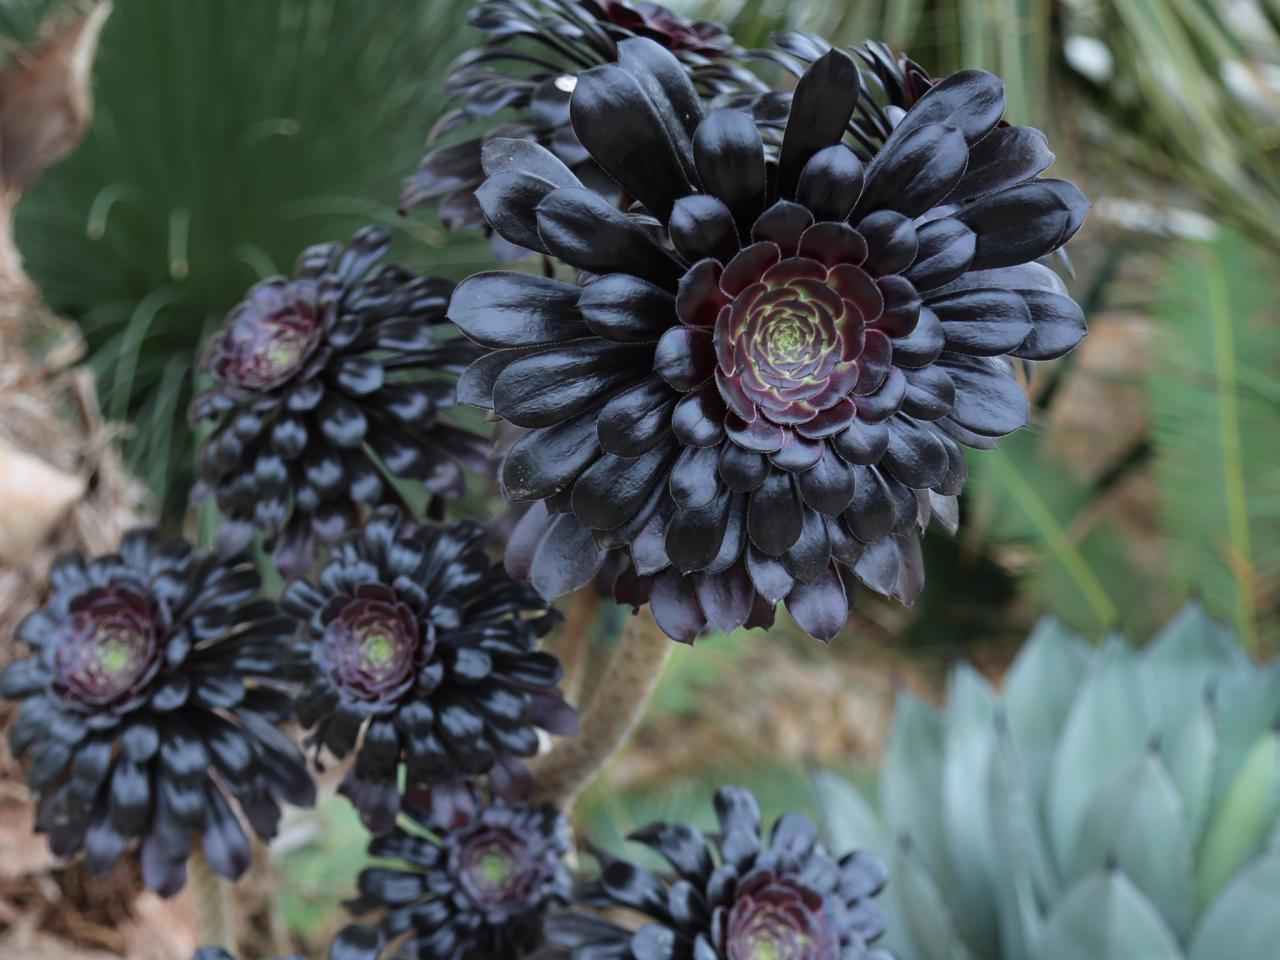 Plants with Black Flowers for Sale - Buying & Growing Guide